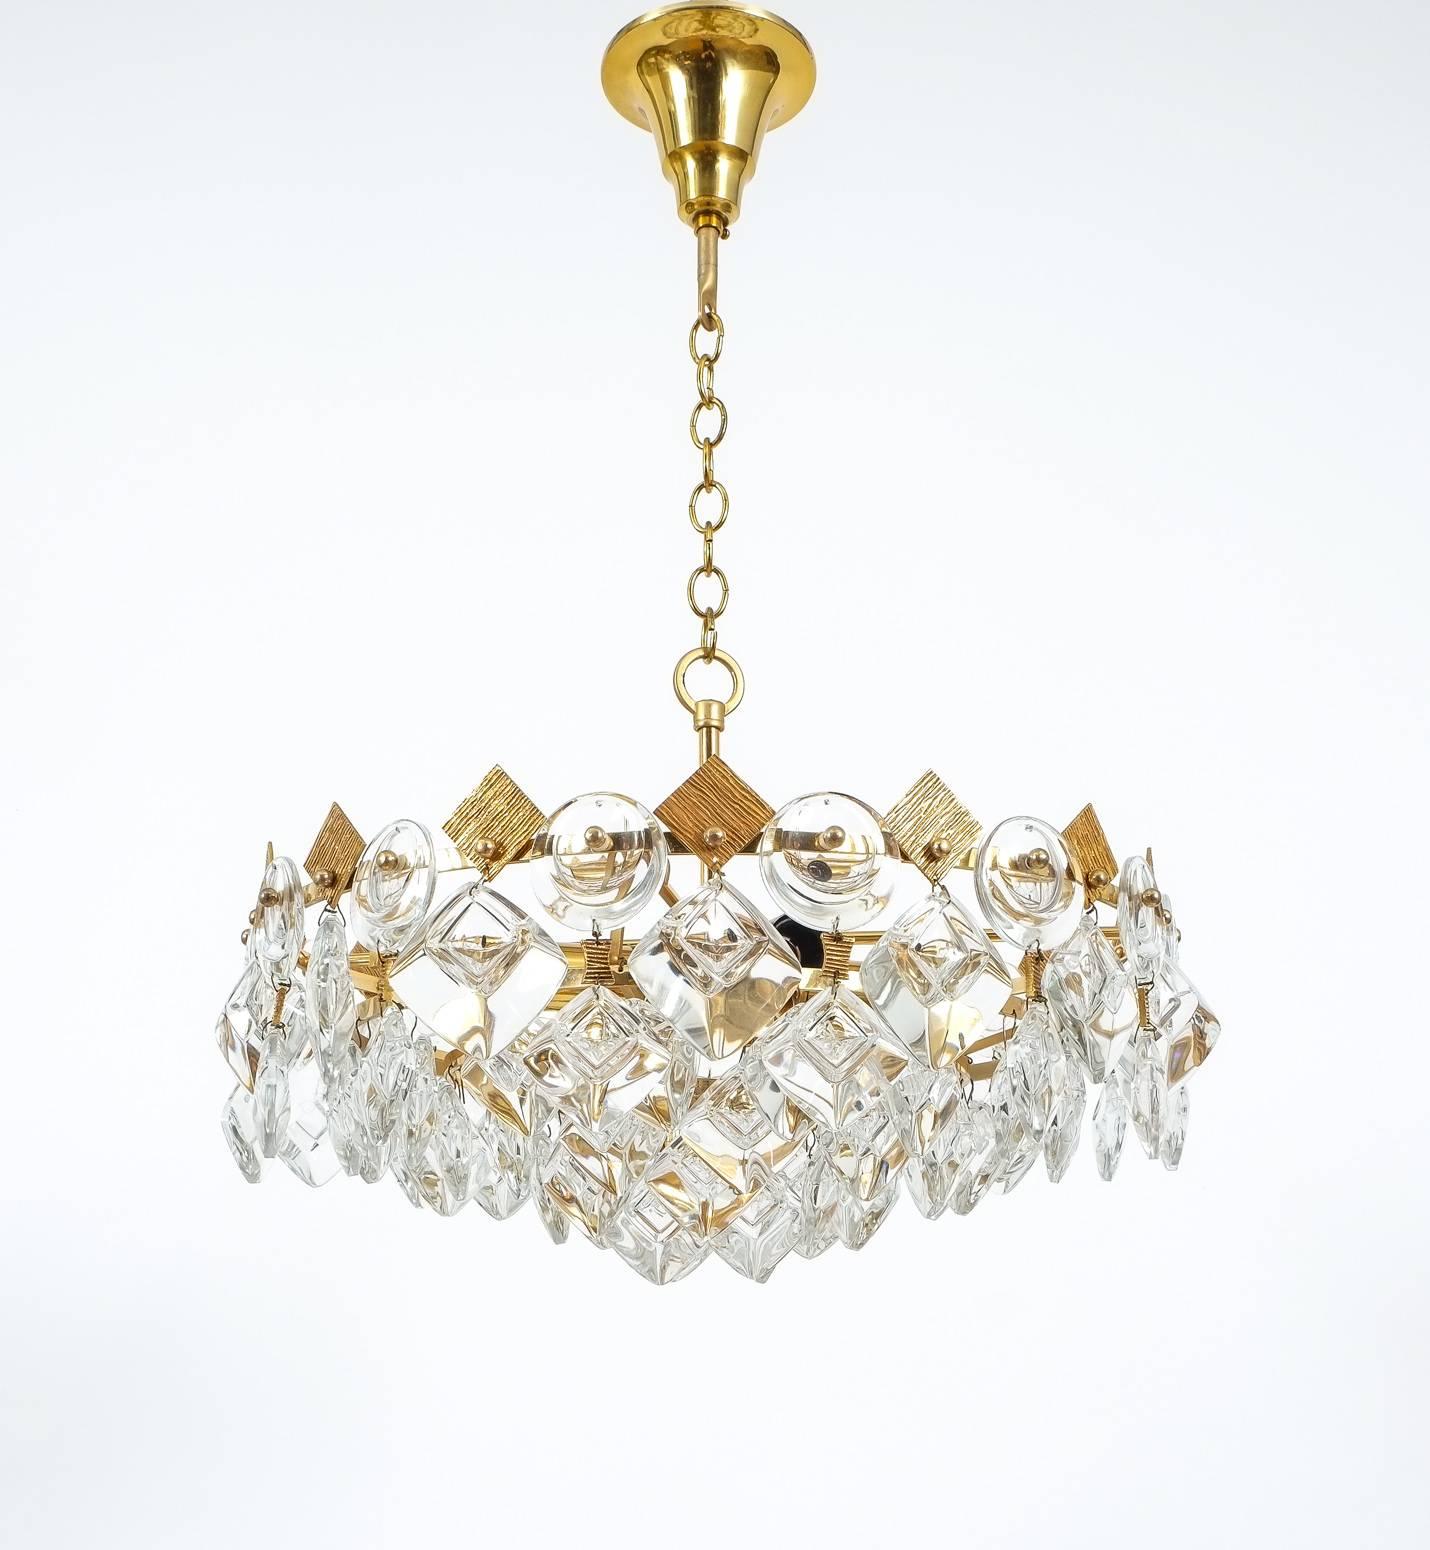 Delicate Palwa light composed of jewel-like circular and rectangular glass pieces and grained brass plates in excellent condition. The chandelier has been professionally cleaned/polished. It features four bulbs with 40W each. Led compatible. The